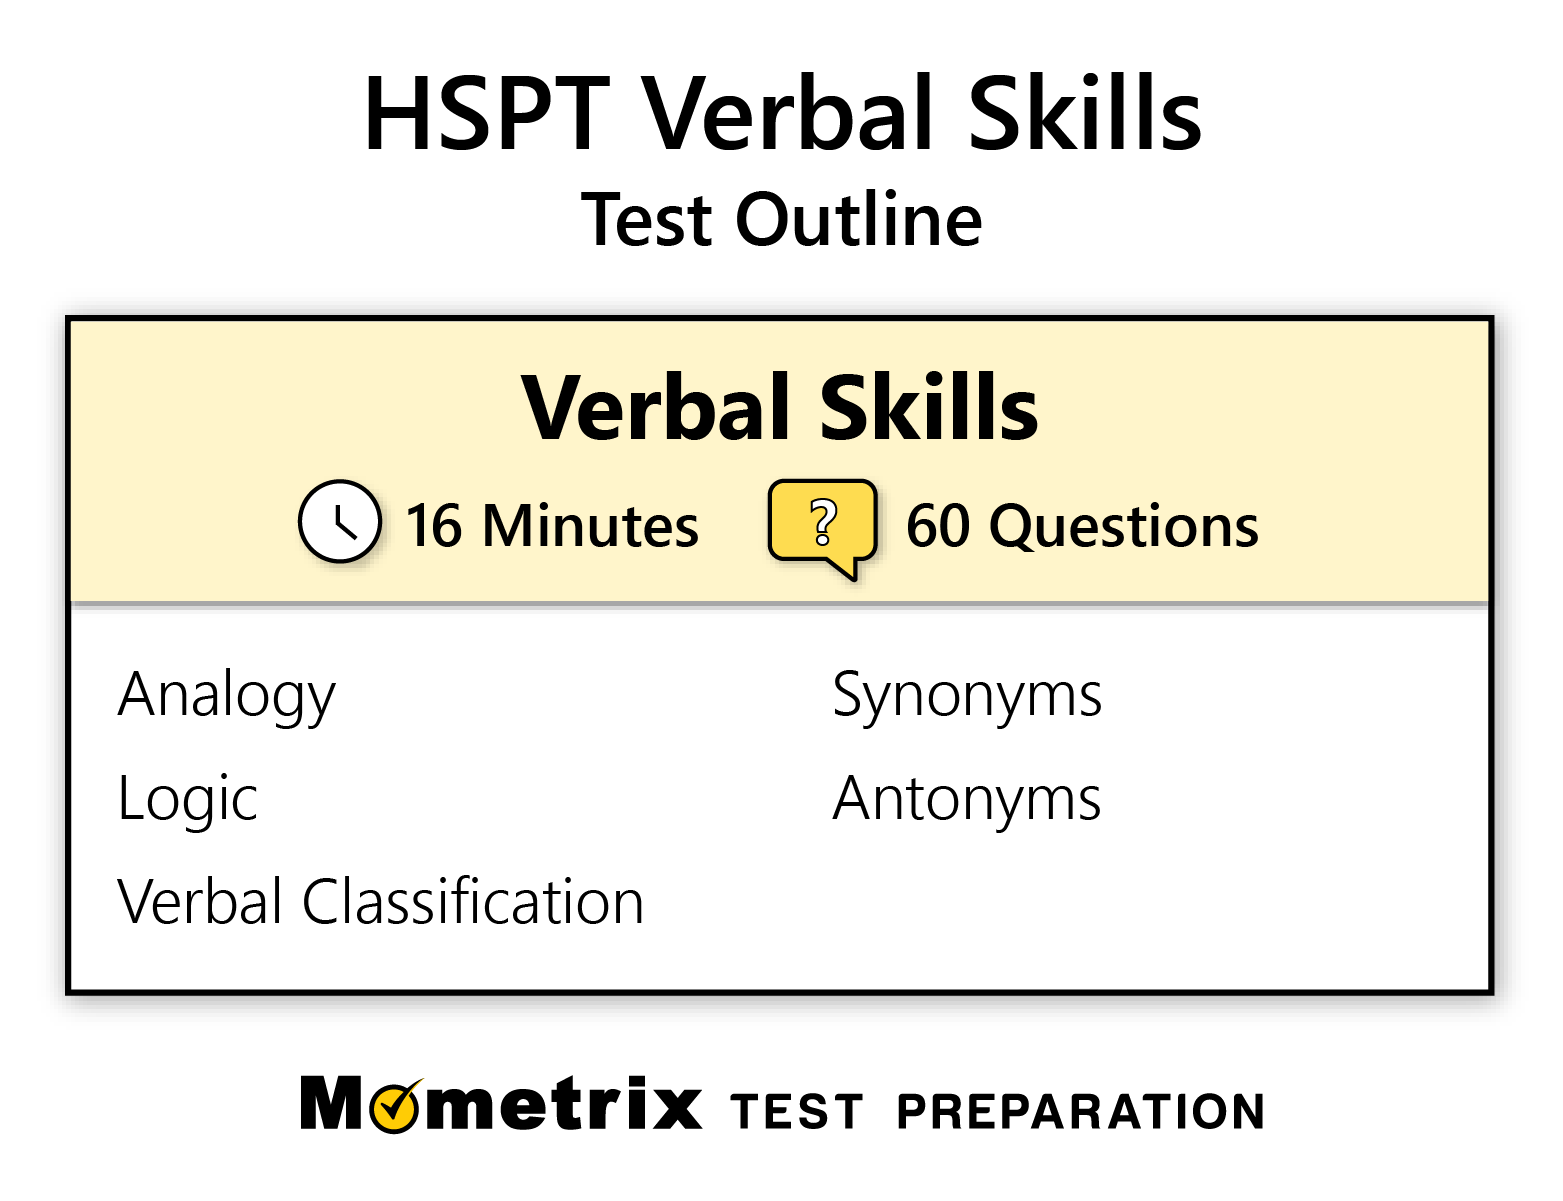 hspt-practice-test-2022-on-the-app-store